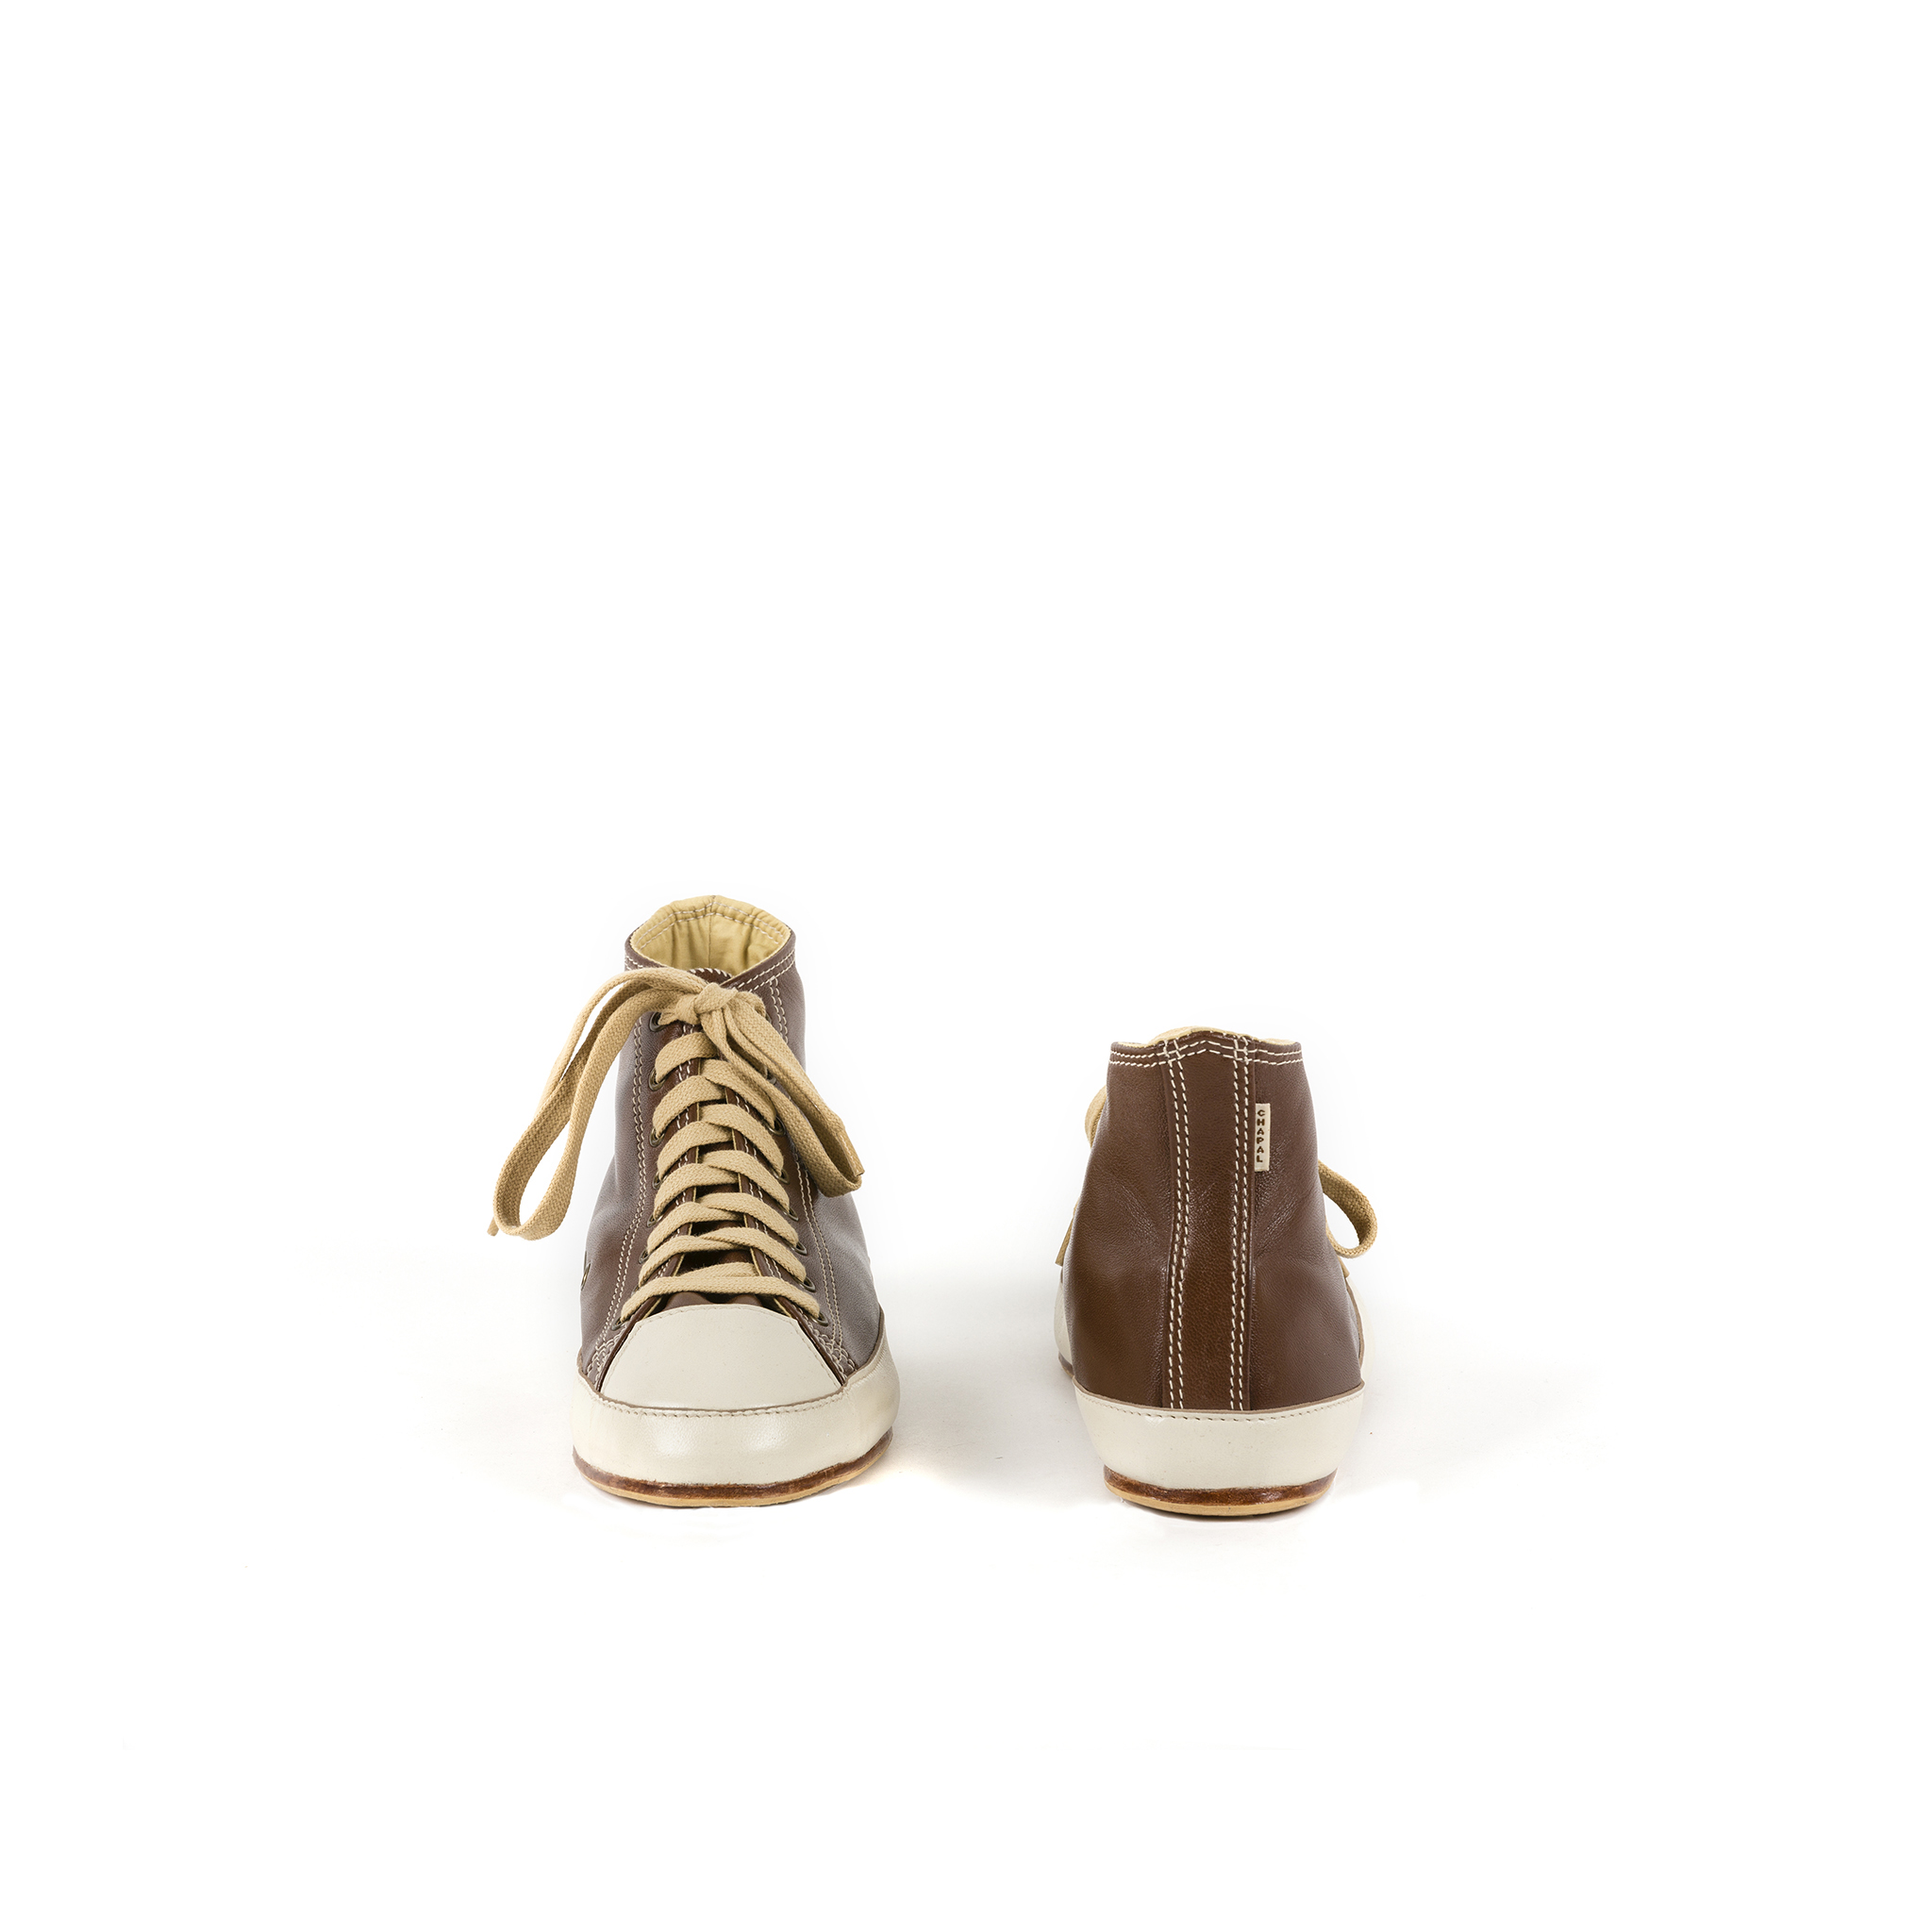 High Sneakers - Glossy leather - Brown and ecru colors